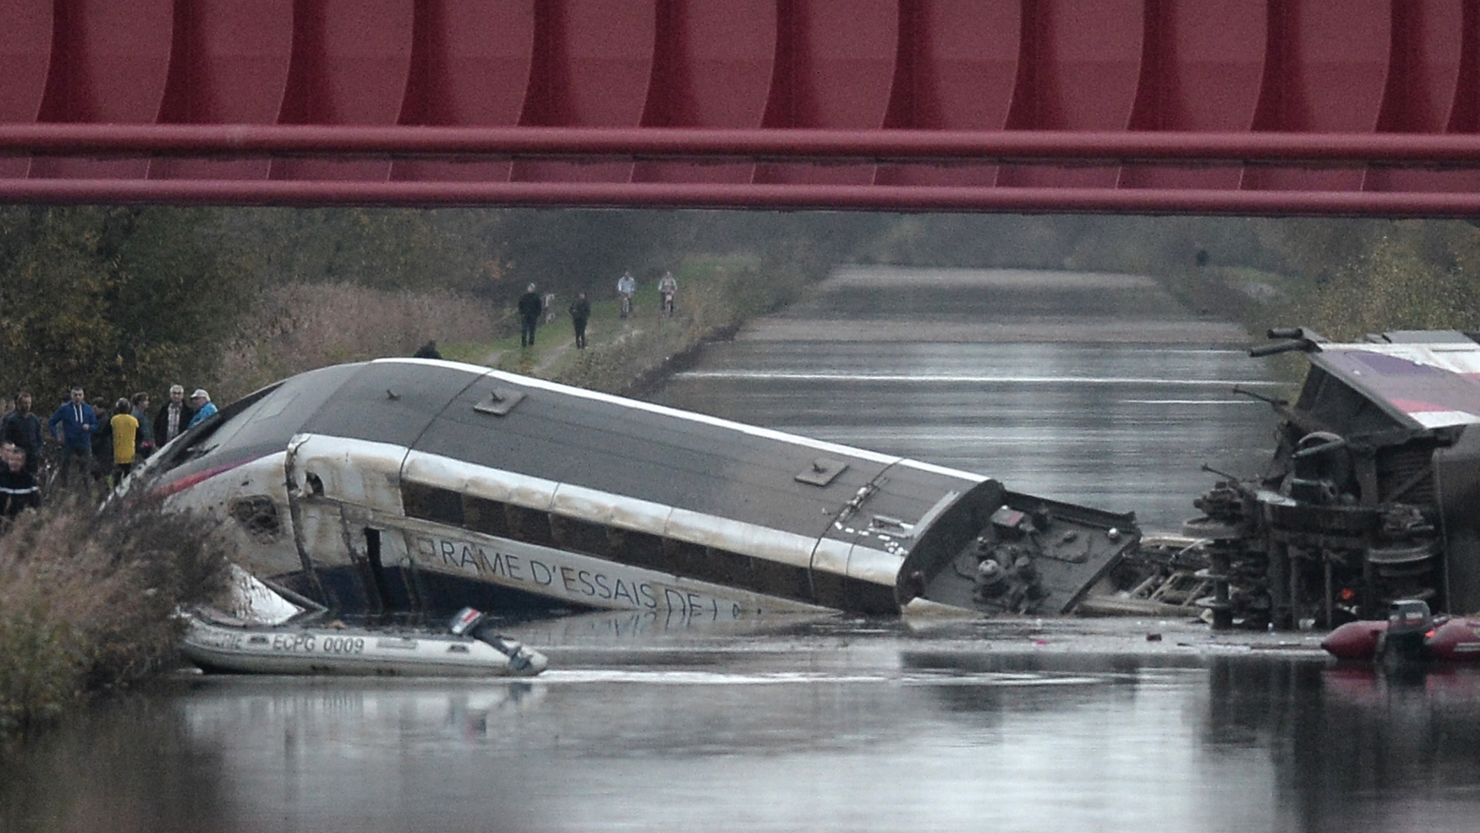 Rescuers arrive at the scene where a high-speed train derailed and crashed into a canal in eastern France on Saturday.